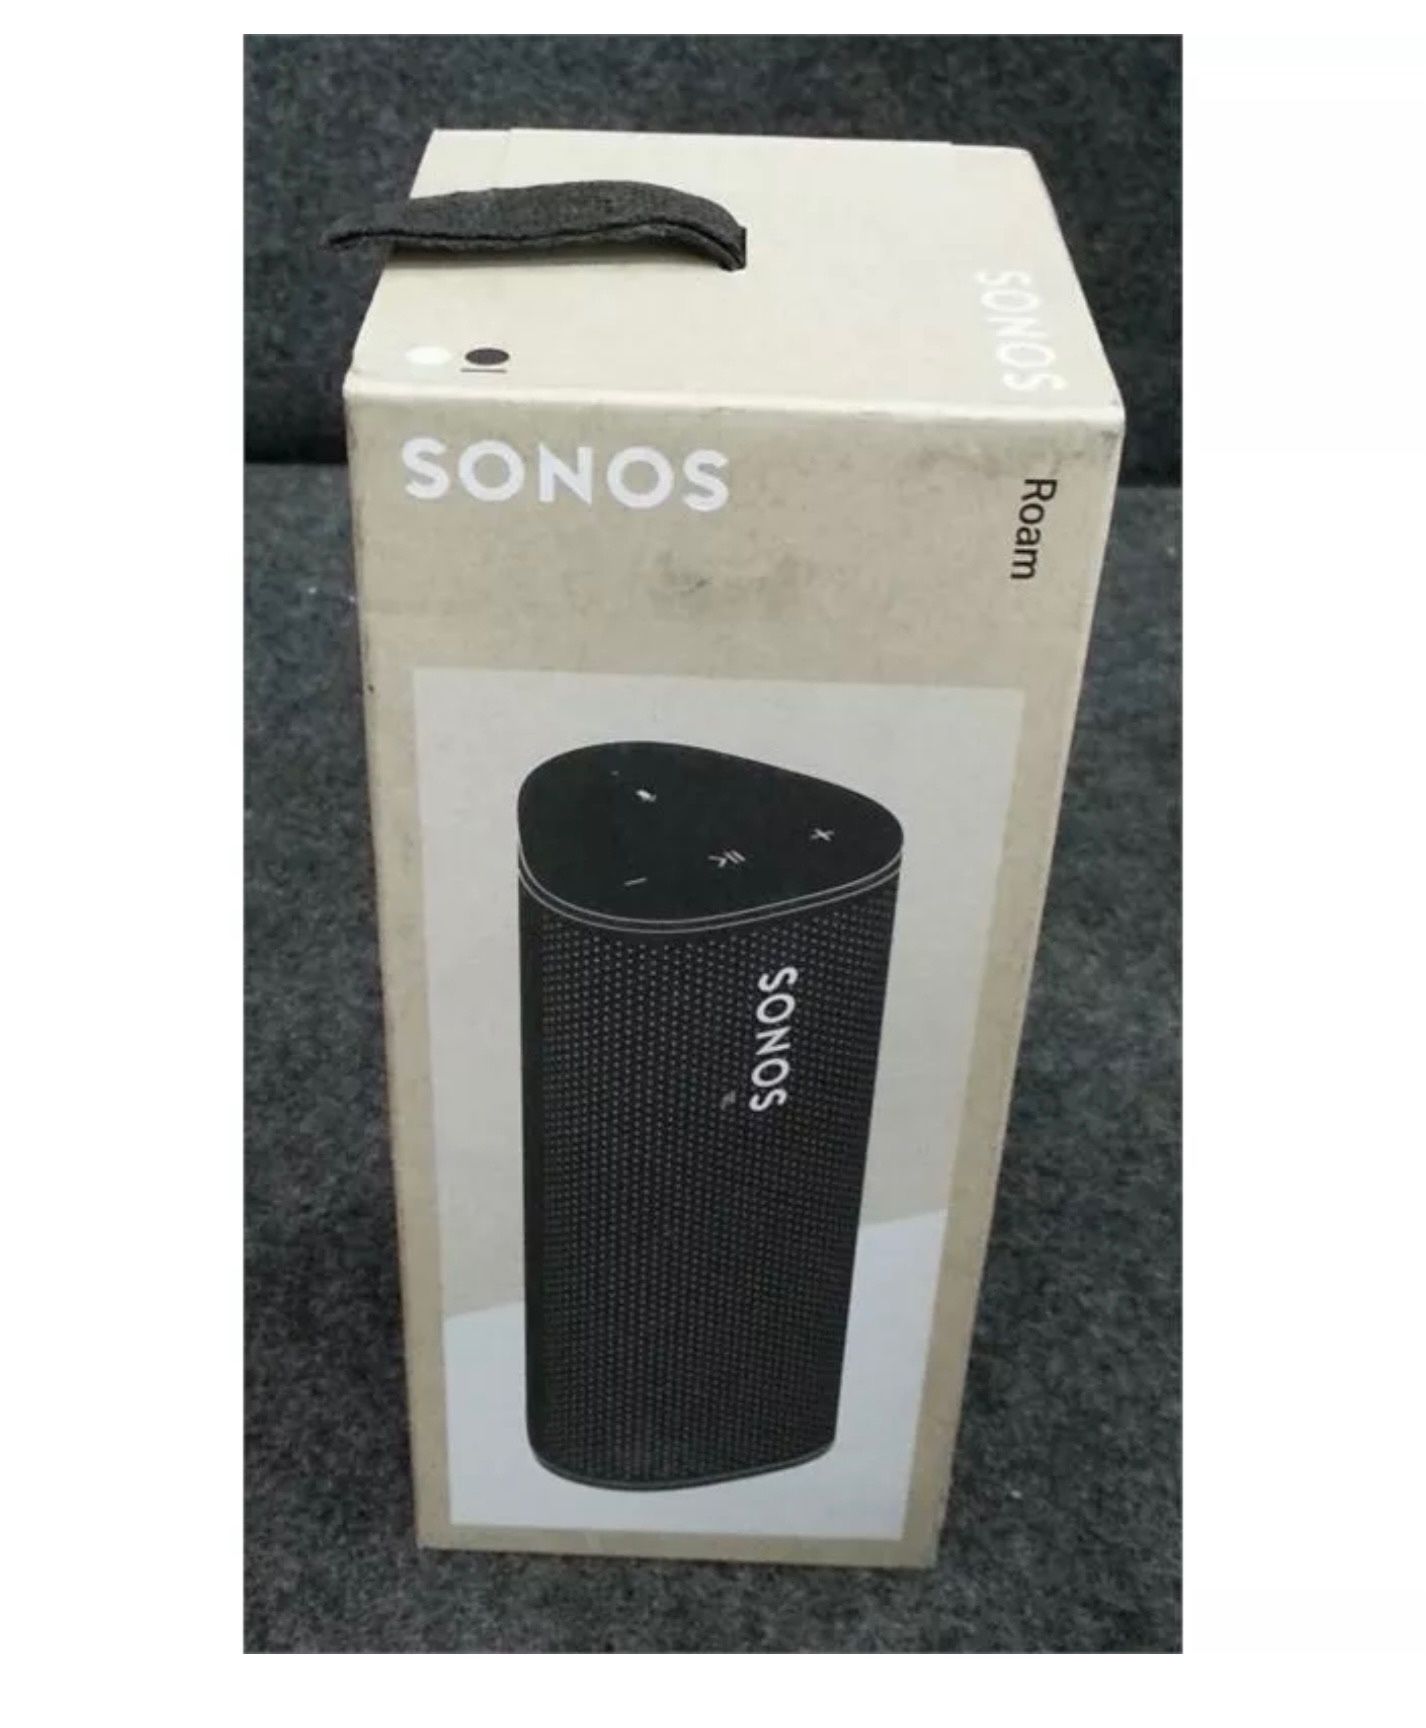 Sonos - Roam Smart Portable Wi-Fi and Bluetooth Speaker - NEW SEALED - NO TRADES - LOCATED IN ENCINO 